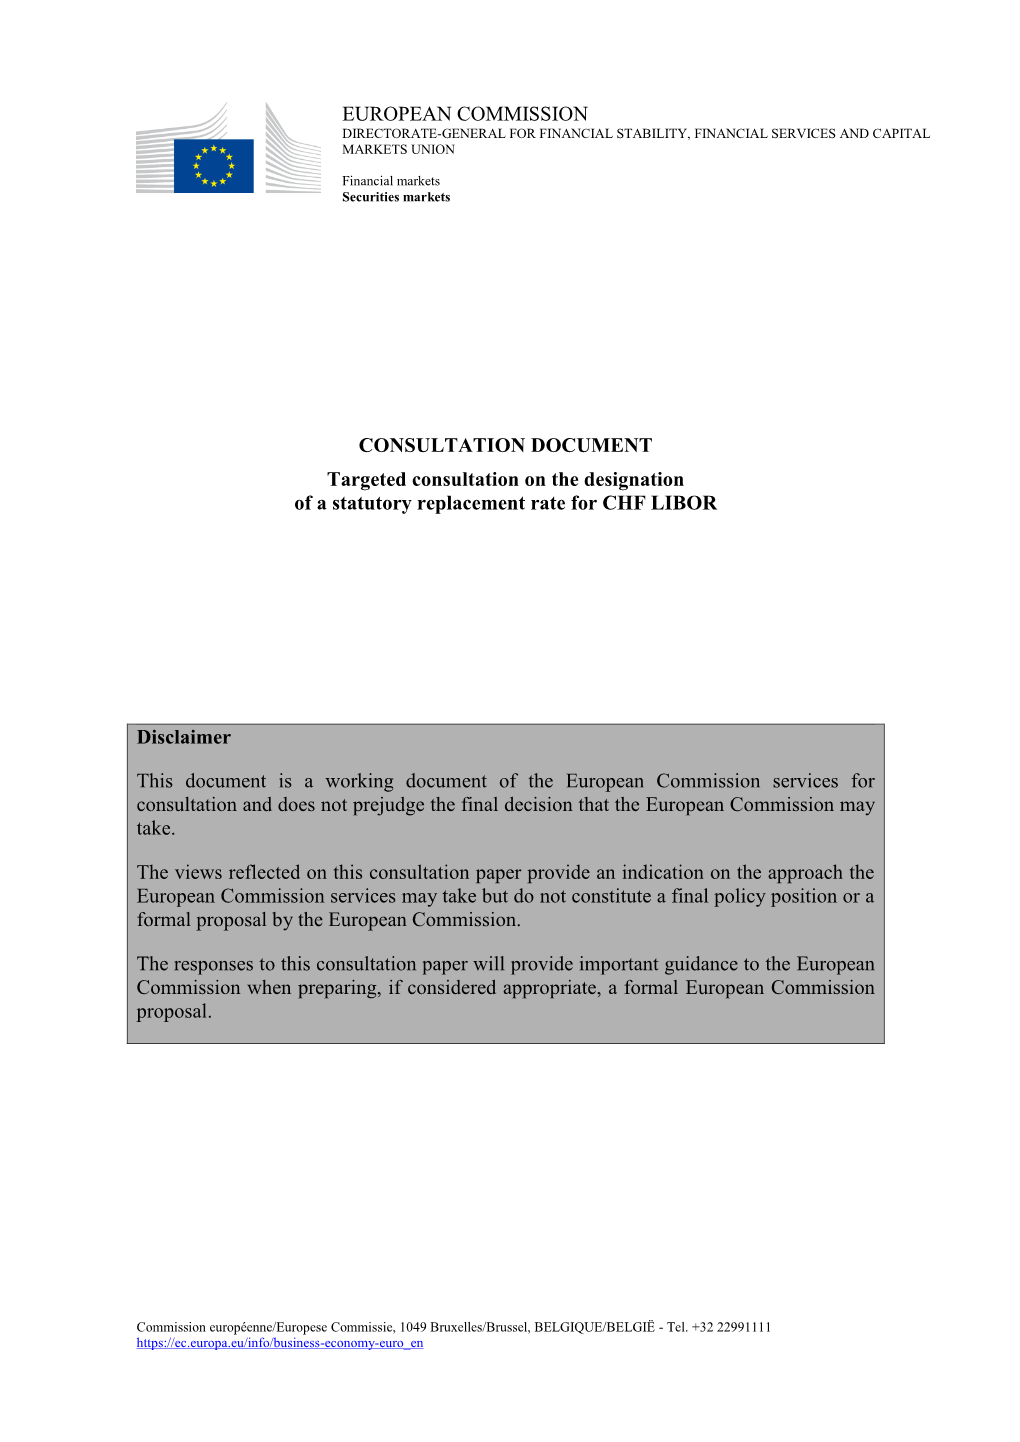 CONSULTATION DOCUMENT Targeted Consultation on the Designation of a Statutory Replacement Rate for CHF LIBOR